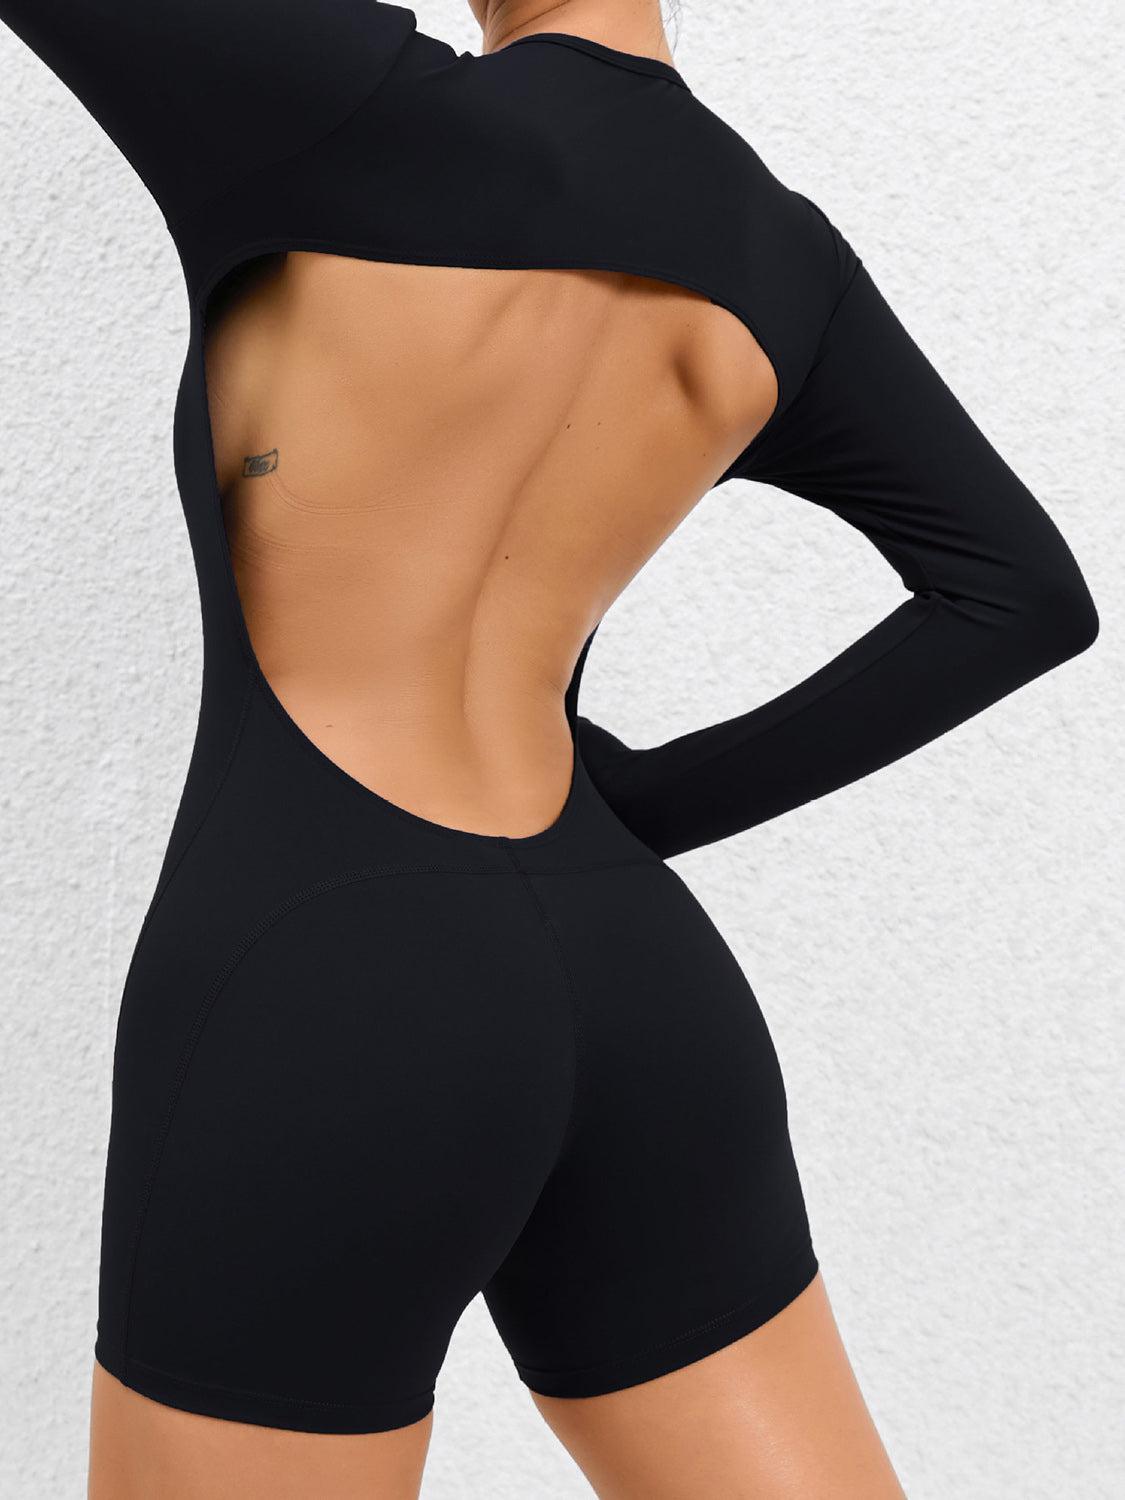 a woman in a black bodysuit with her back to the camera